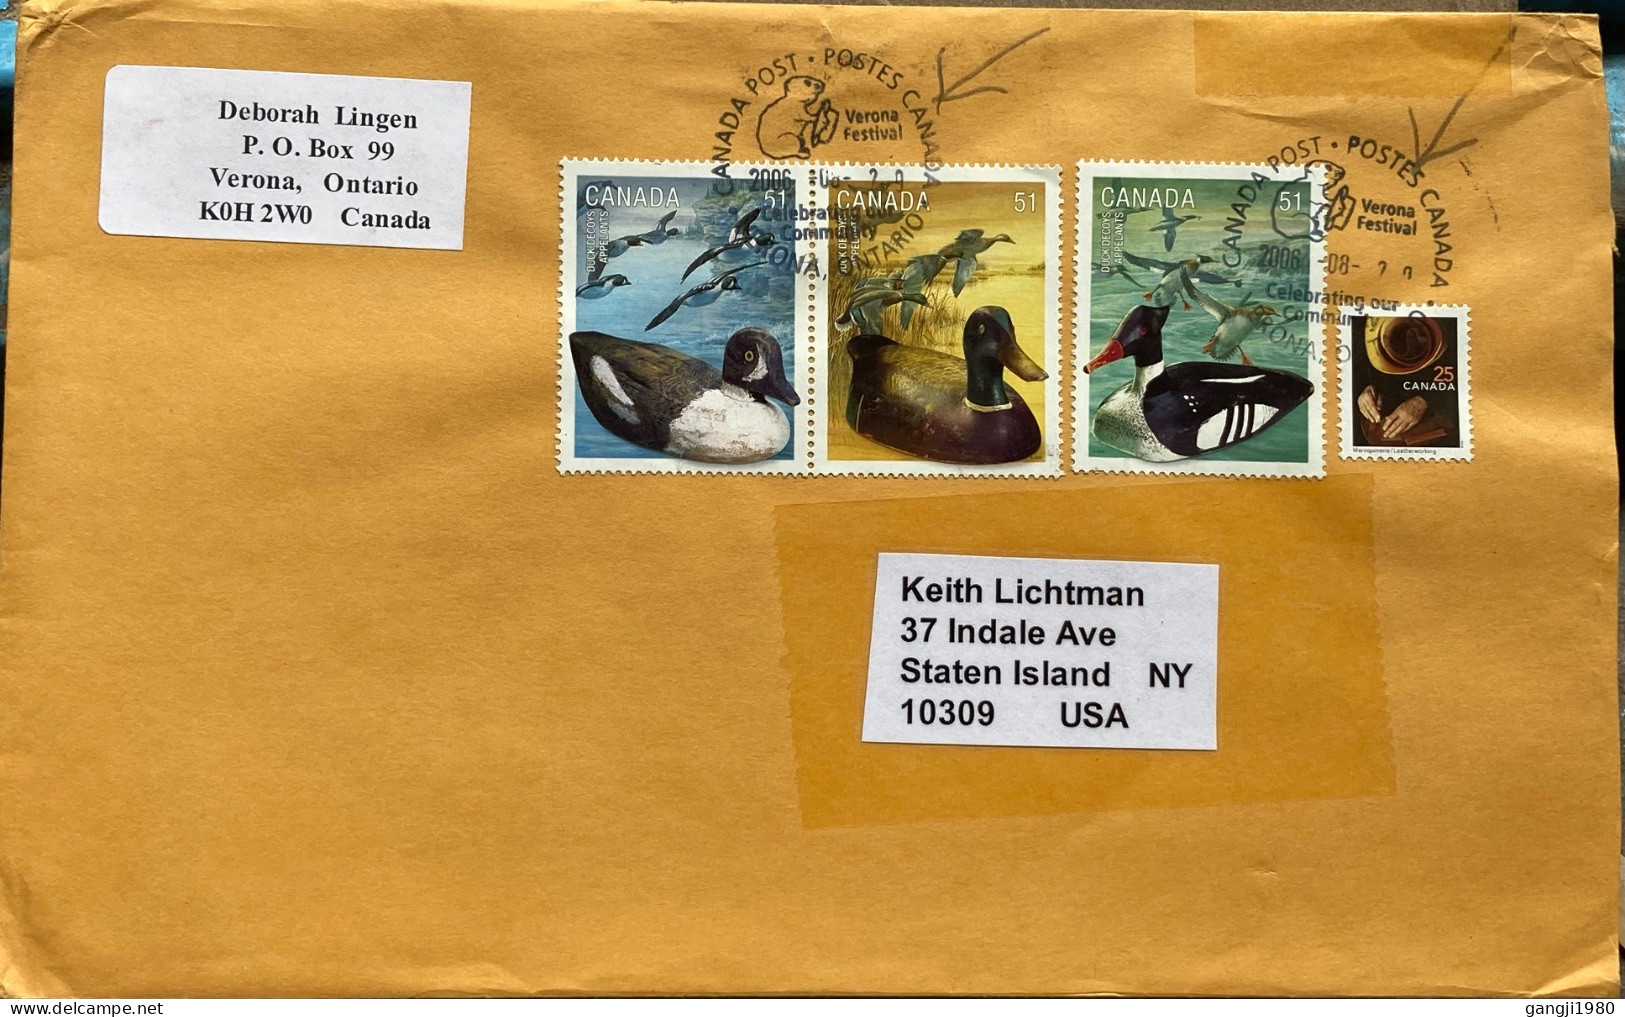 CANADA-2006, COVER USED TO USA, 4 BIRD DUCK STAMP, ANIMAL PICTURE CANCEL, VERON CITY FESTIVAL, CELEBRATING OUR COMMUNITY - Covers & Documents